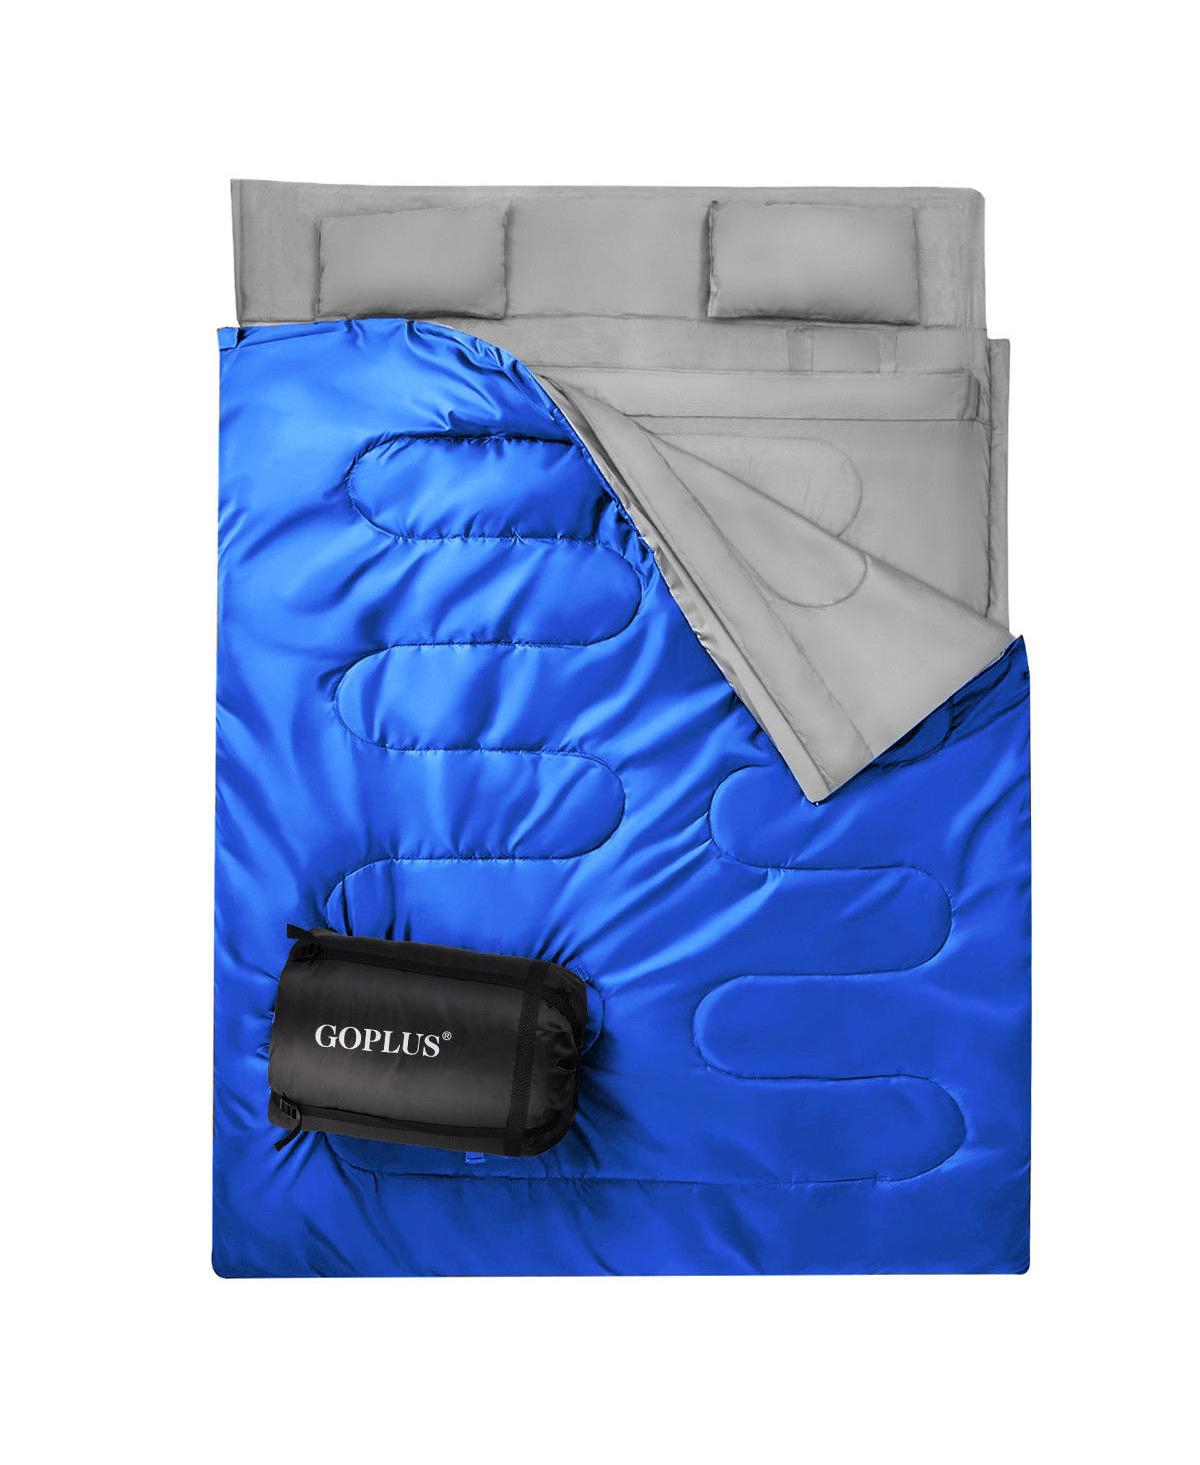 Double 2 Person Sleeping Bag Waterproof w/ 2 Pillows Camping Queen Size Xl - Blue